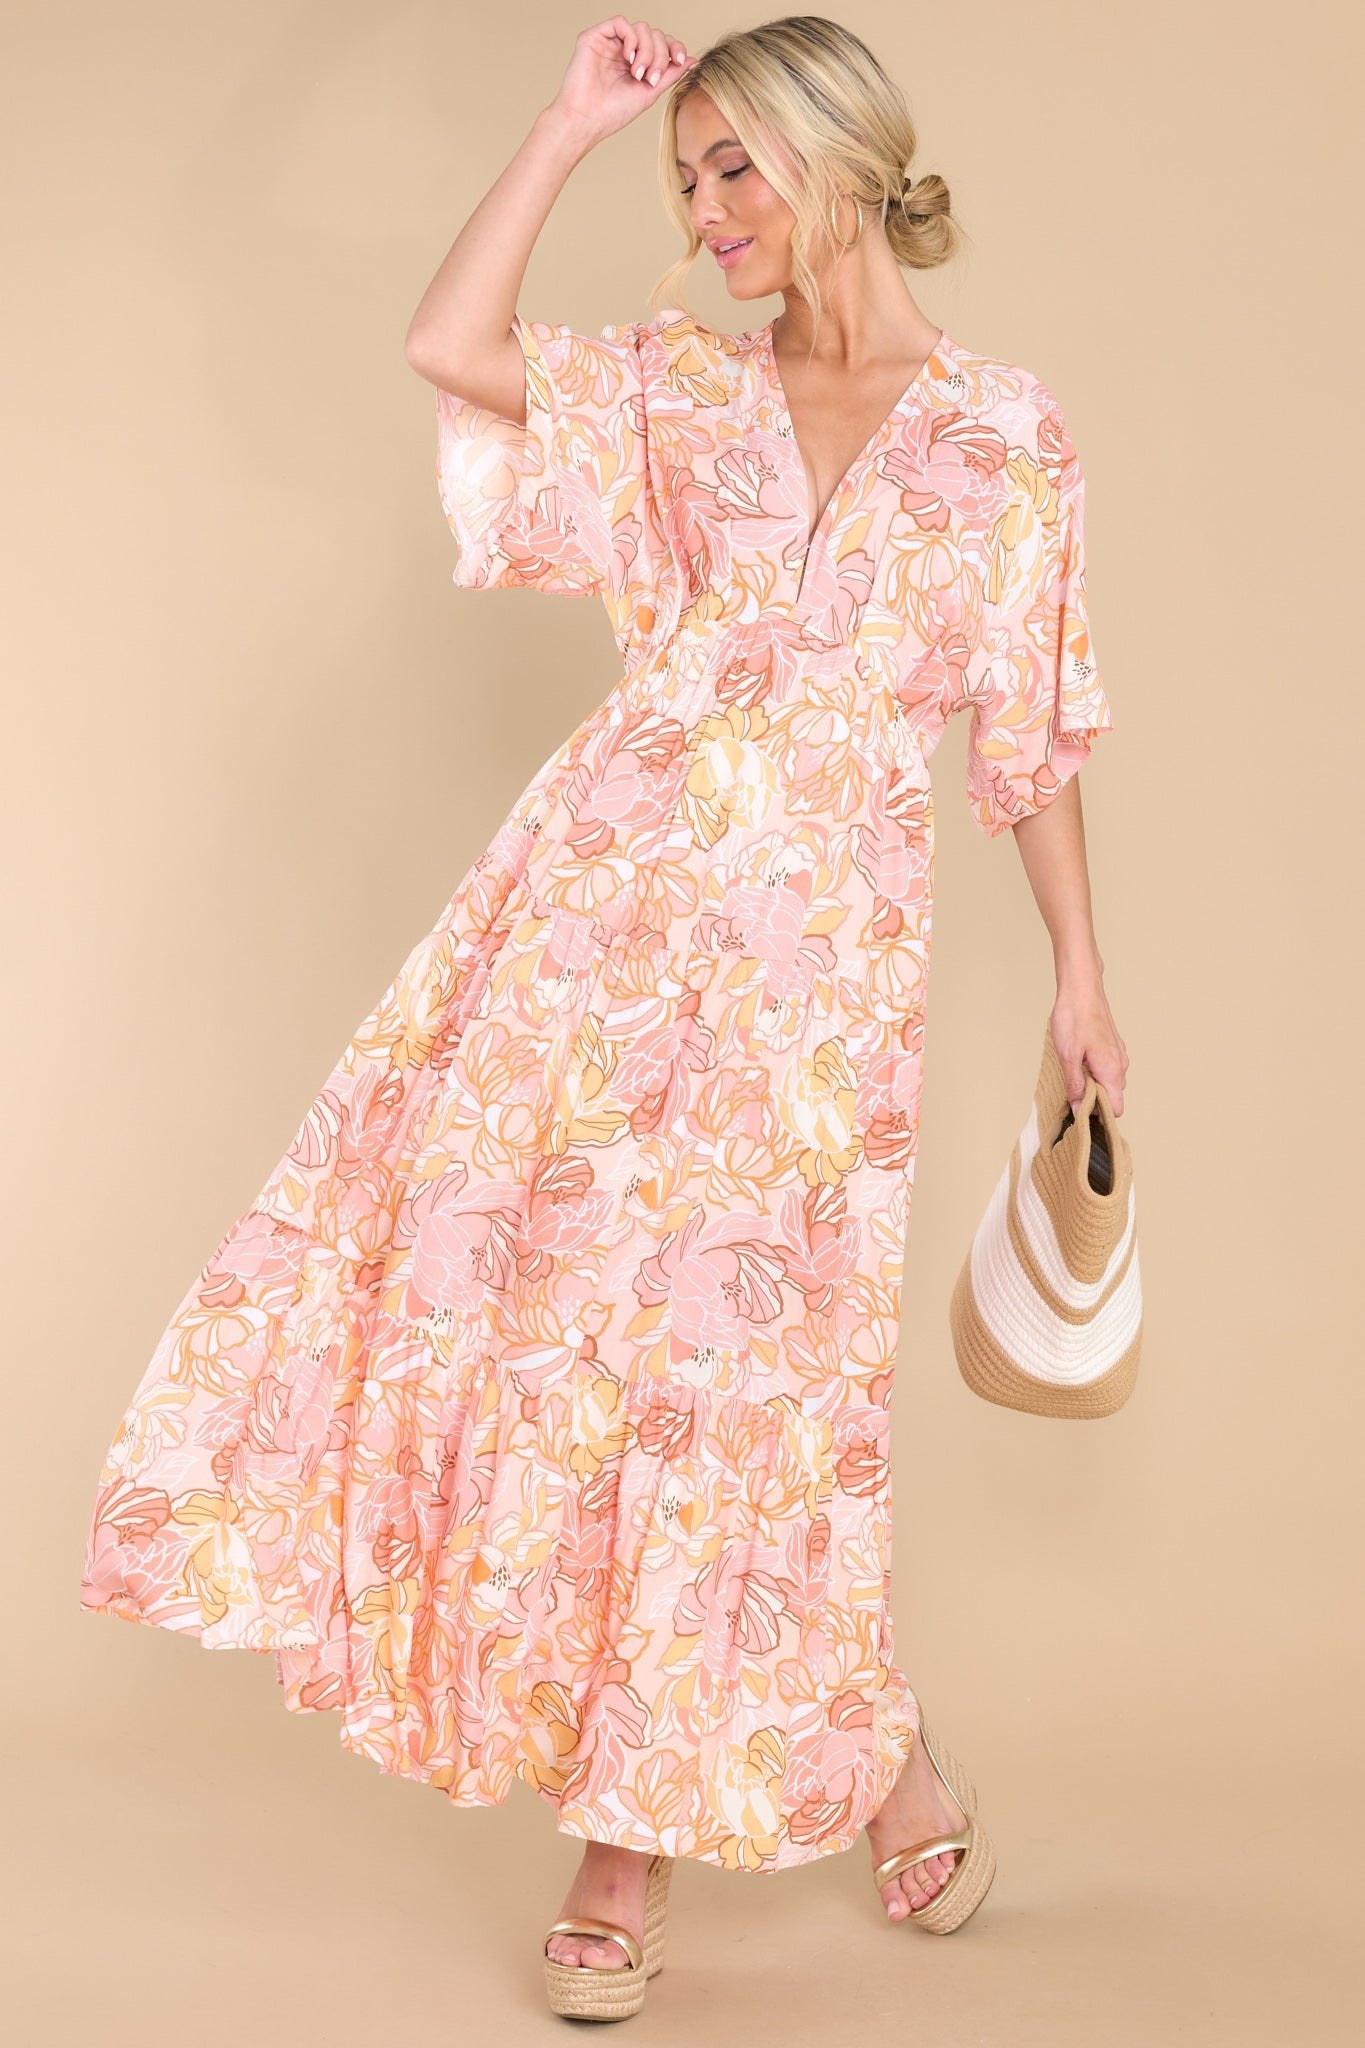 Seaside Style Apricot Floral Print Dress - Red Dress